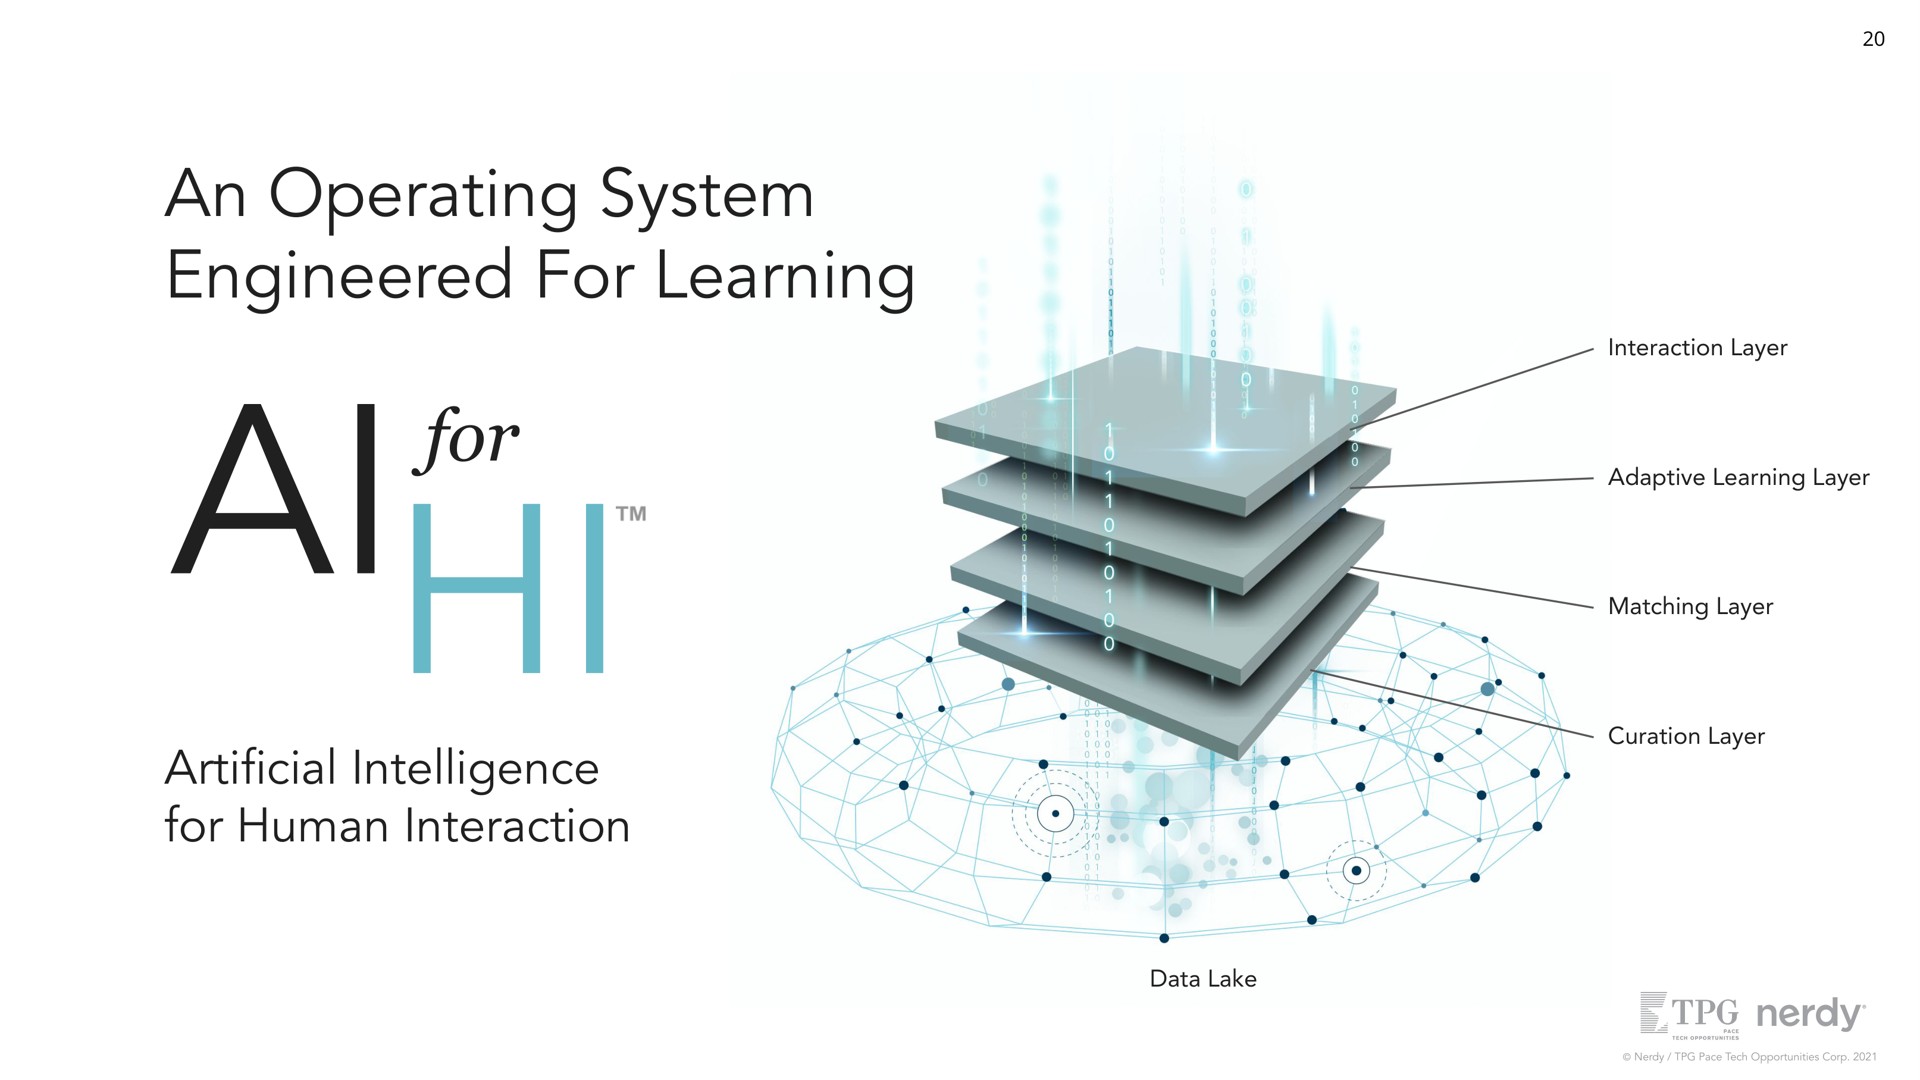 an operating system engineered for learning for intelligence for human interaction interaction layer adaptive learning layer matching layer curation layer data lake aly | Nerdy